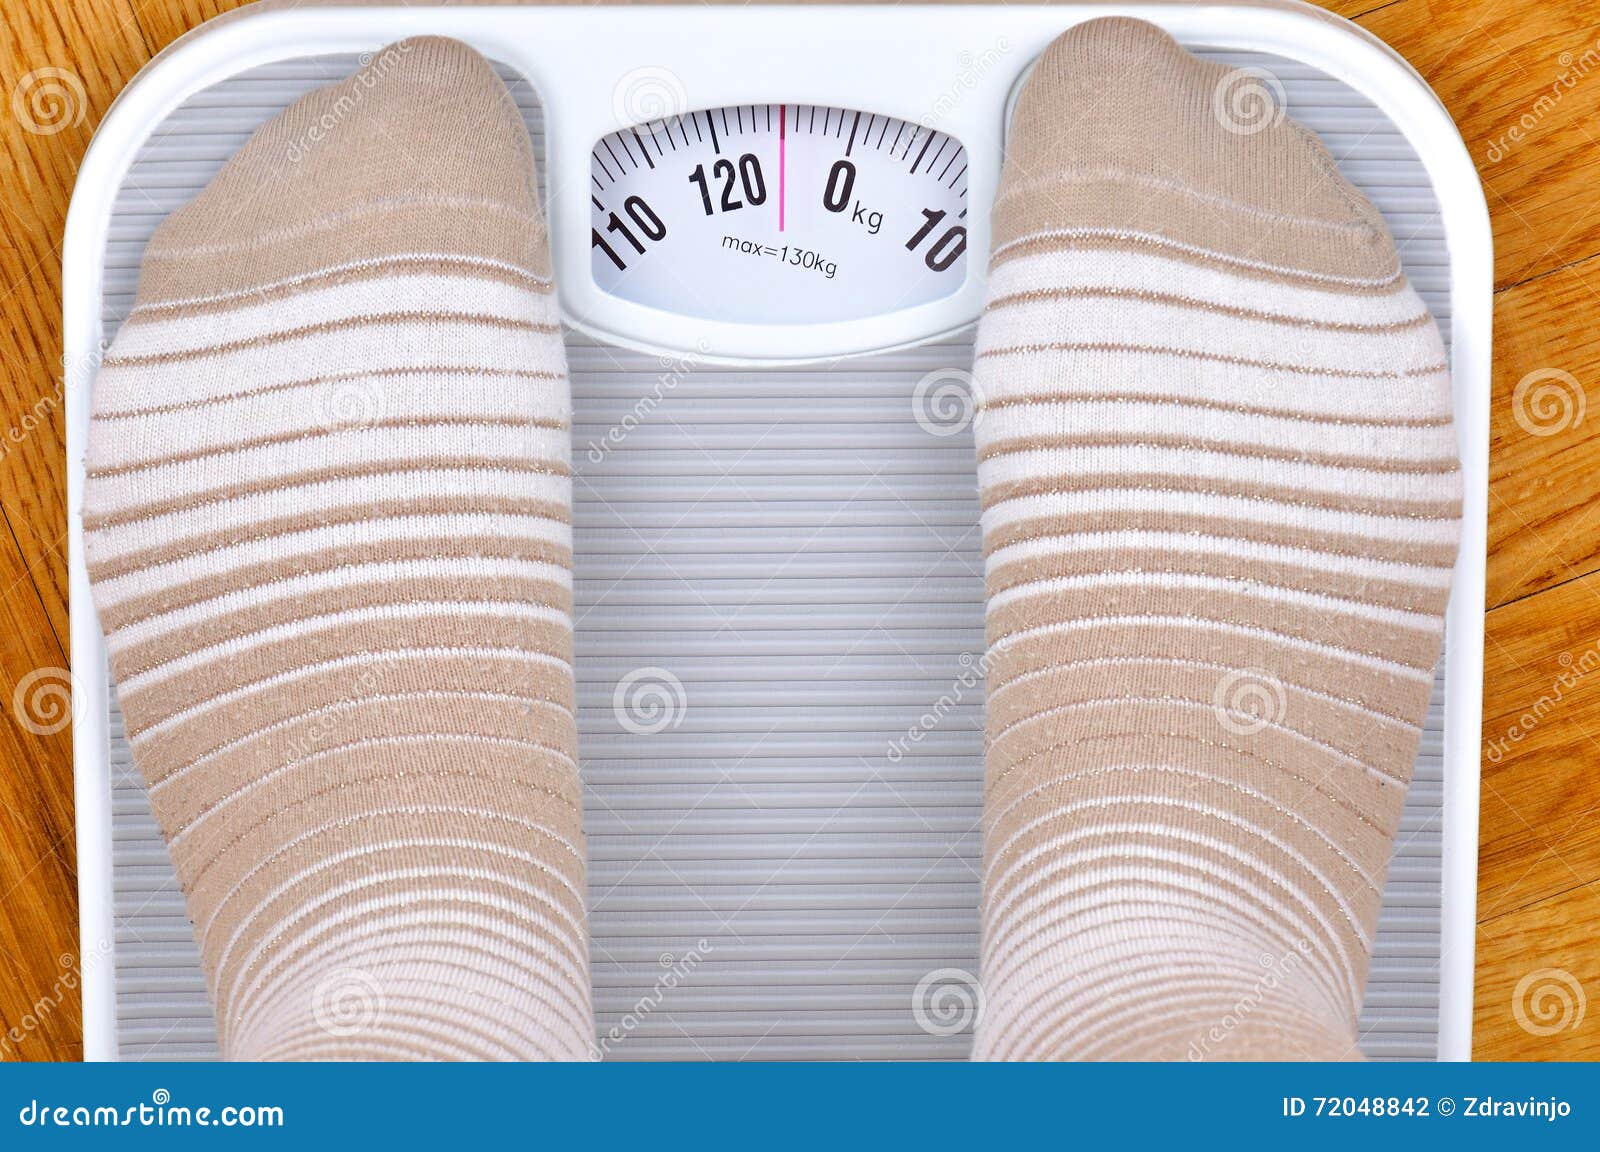 https://thumbs.dreamstime.com/z/feet-scale-overweight-person-standing-72048842.jpg